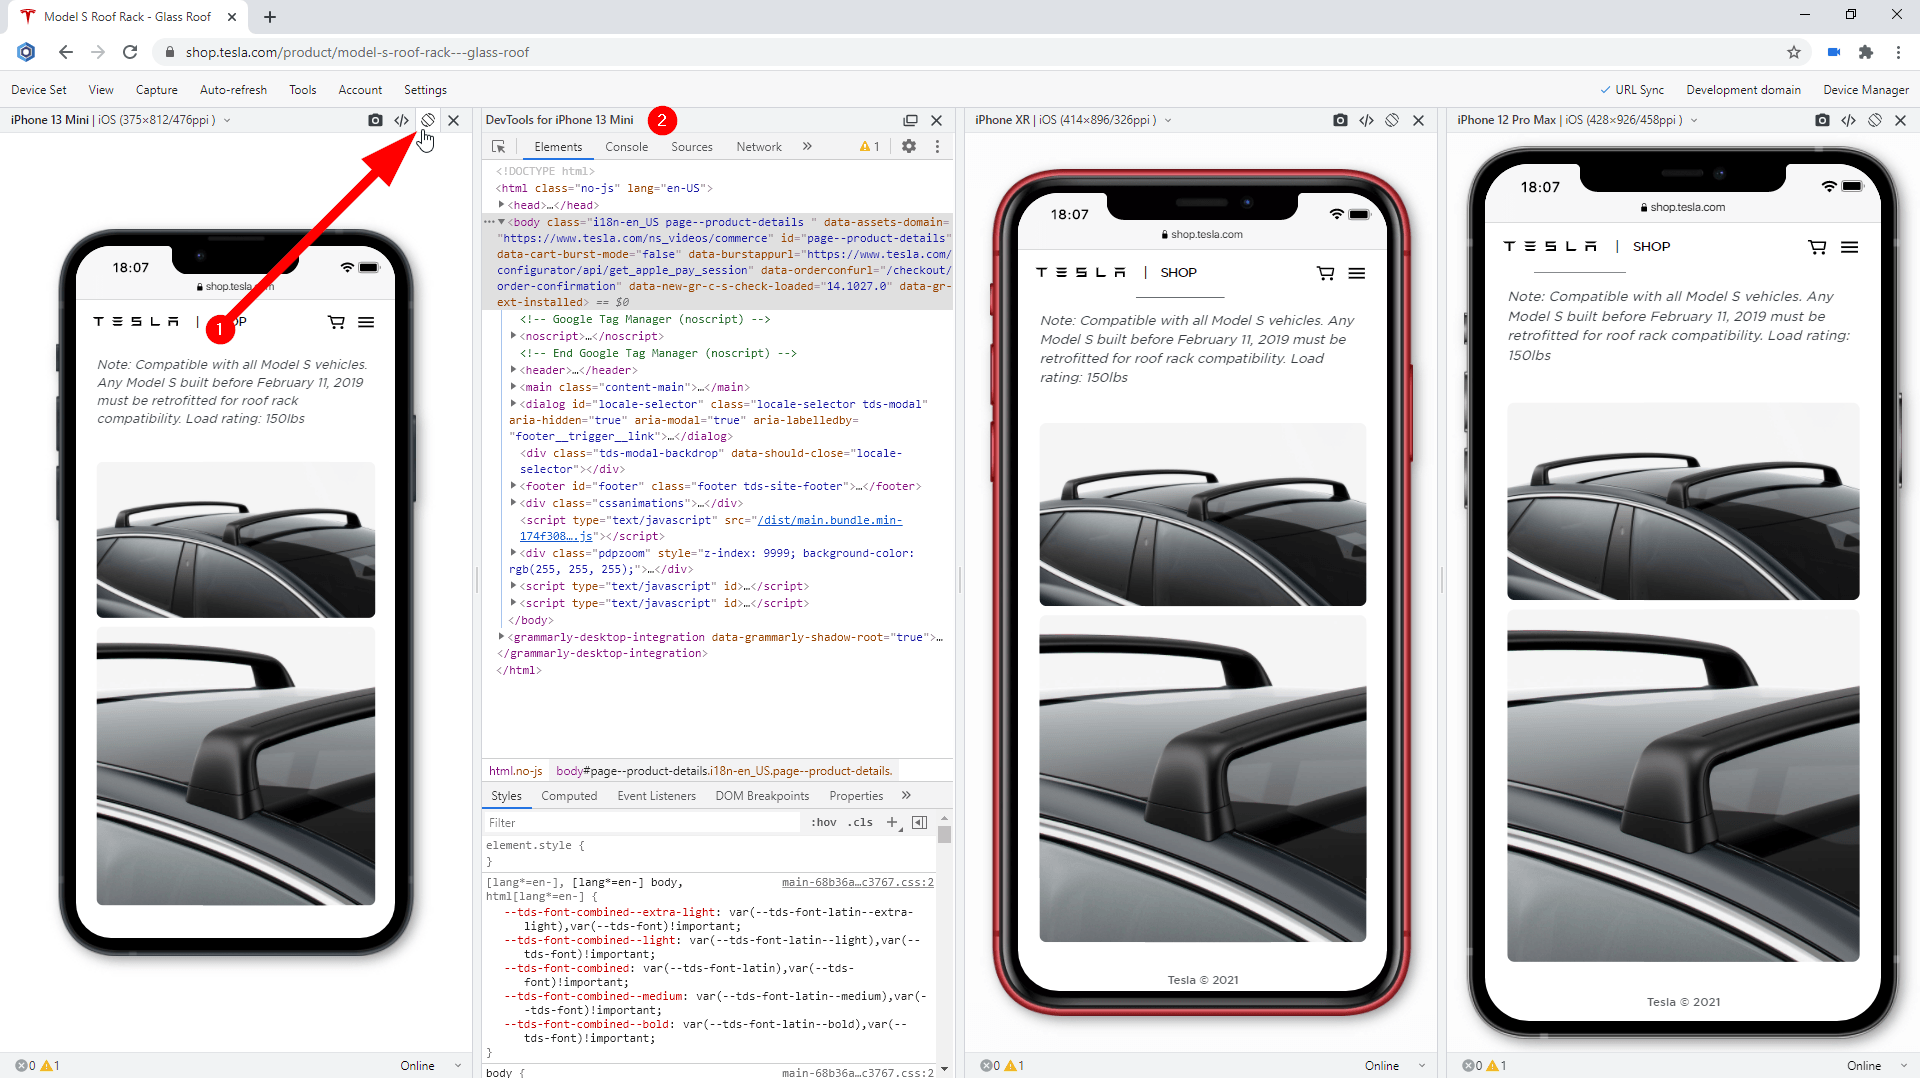 Using Developer Tools on iPhone 13-series